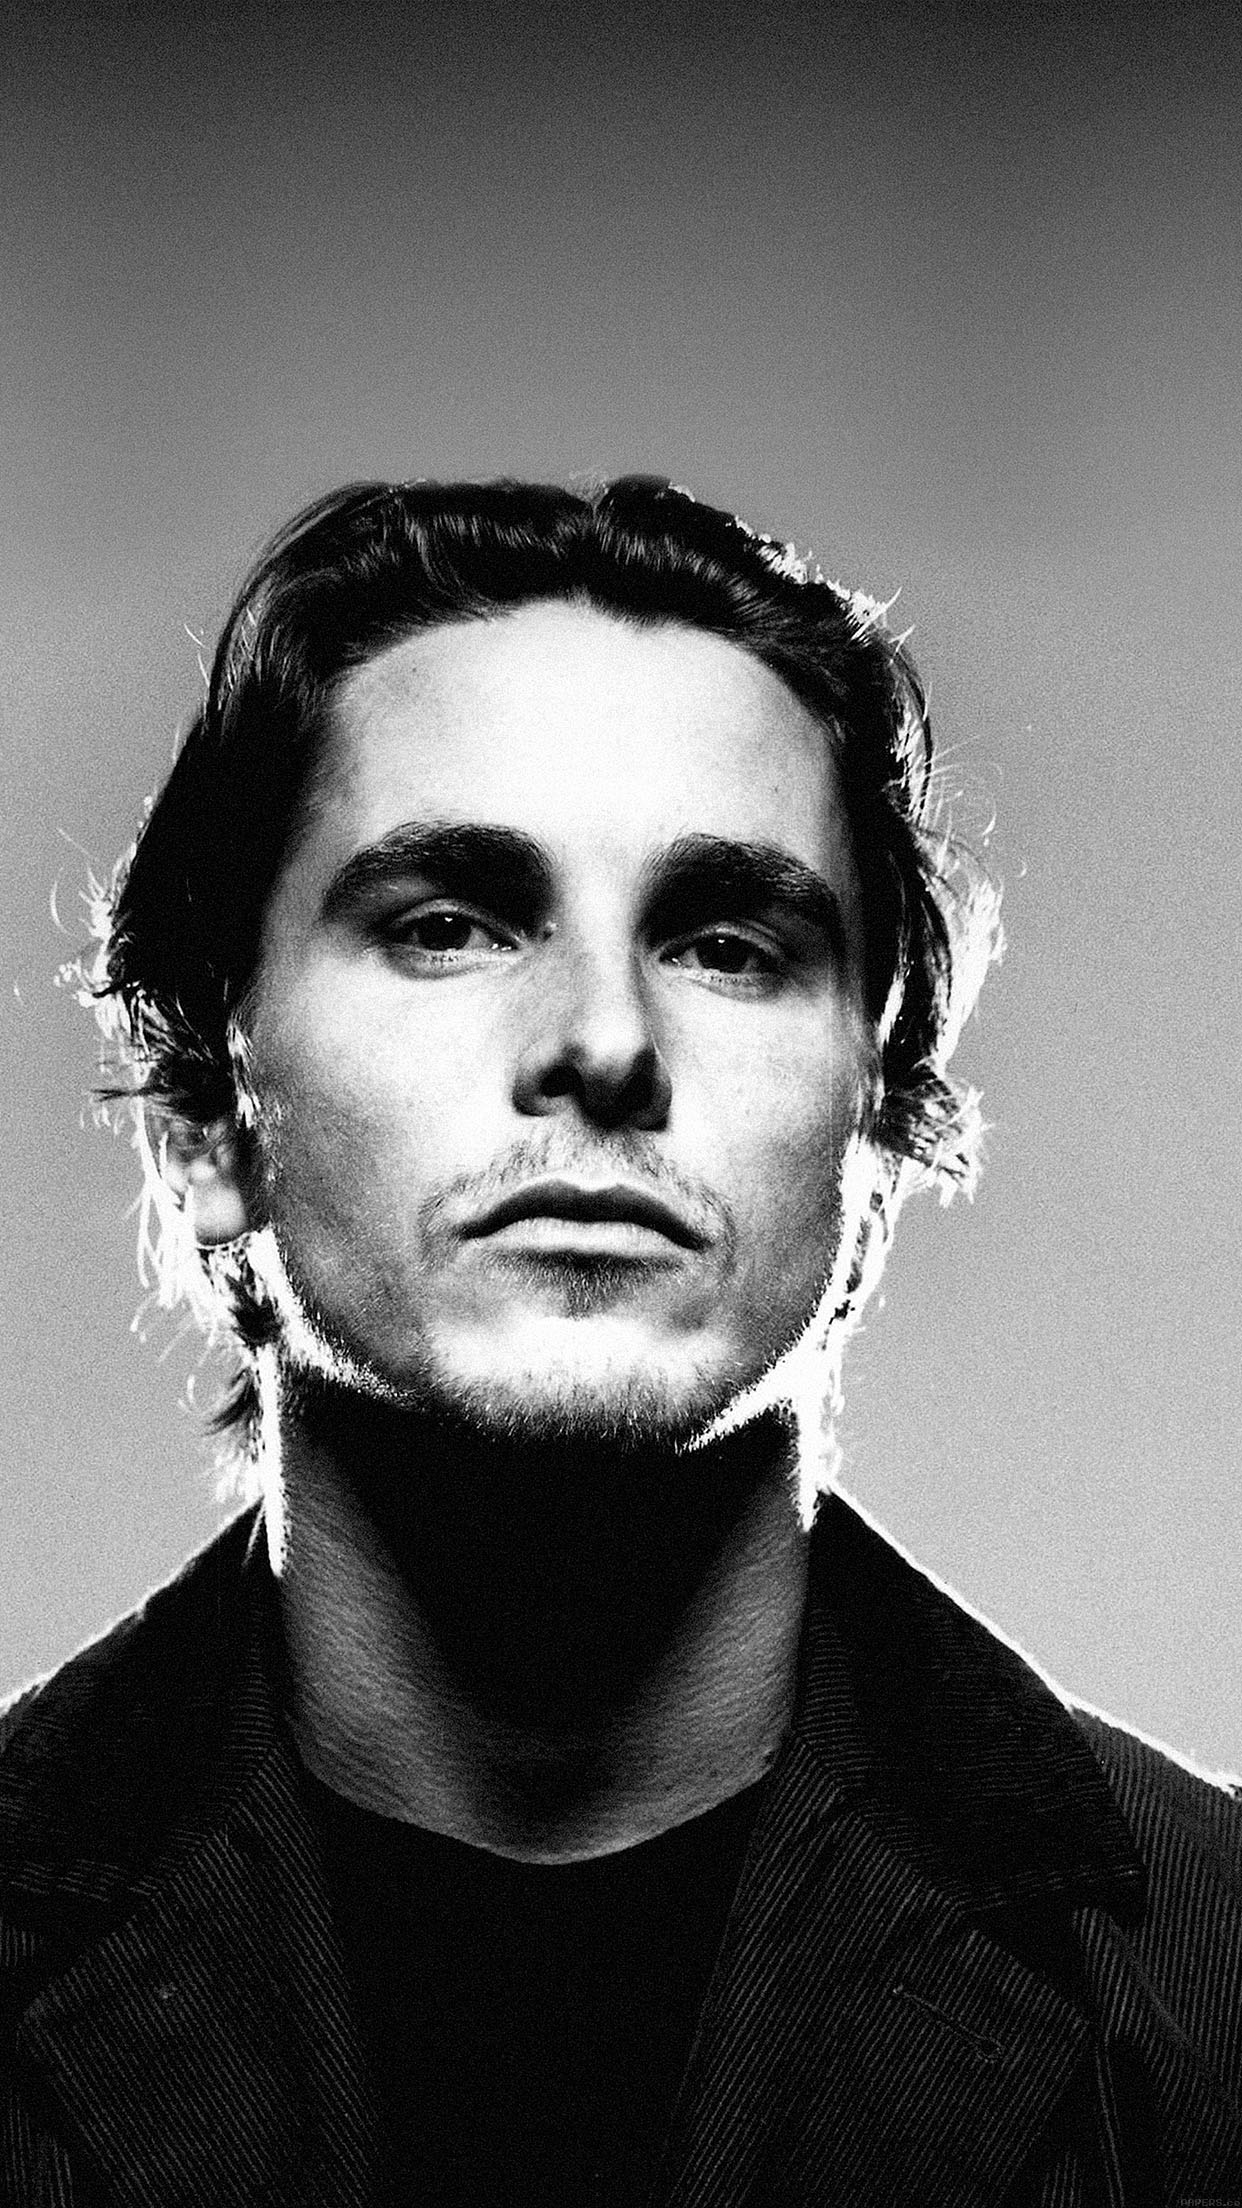 Wallpaper Christian Bale Film Face Android wallpaper